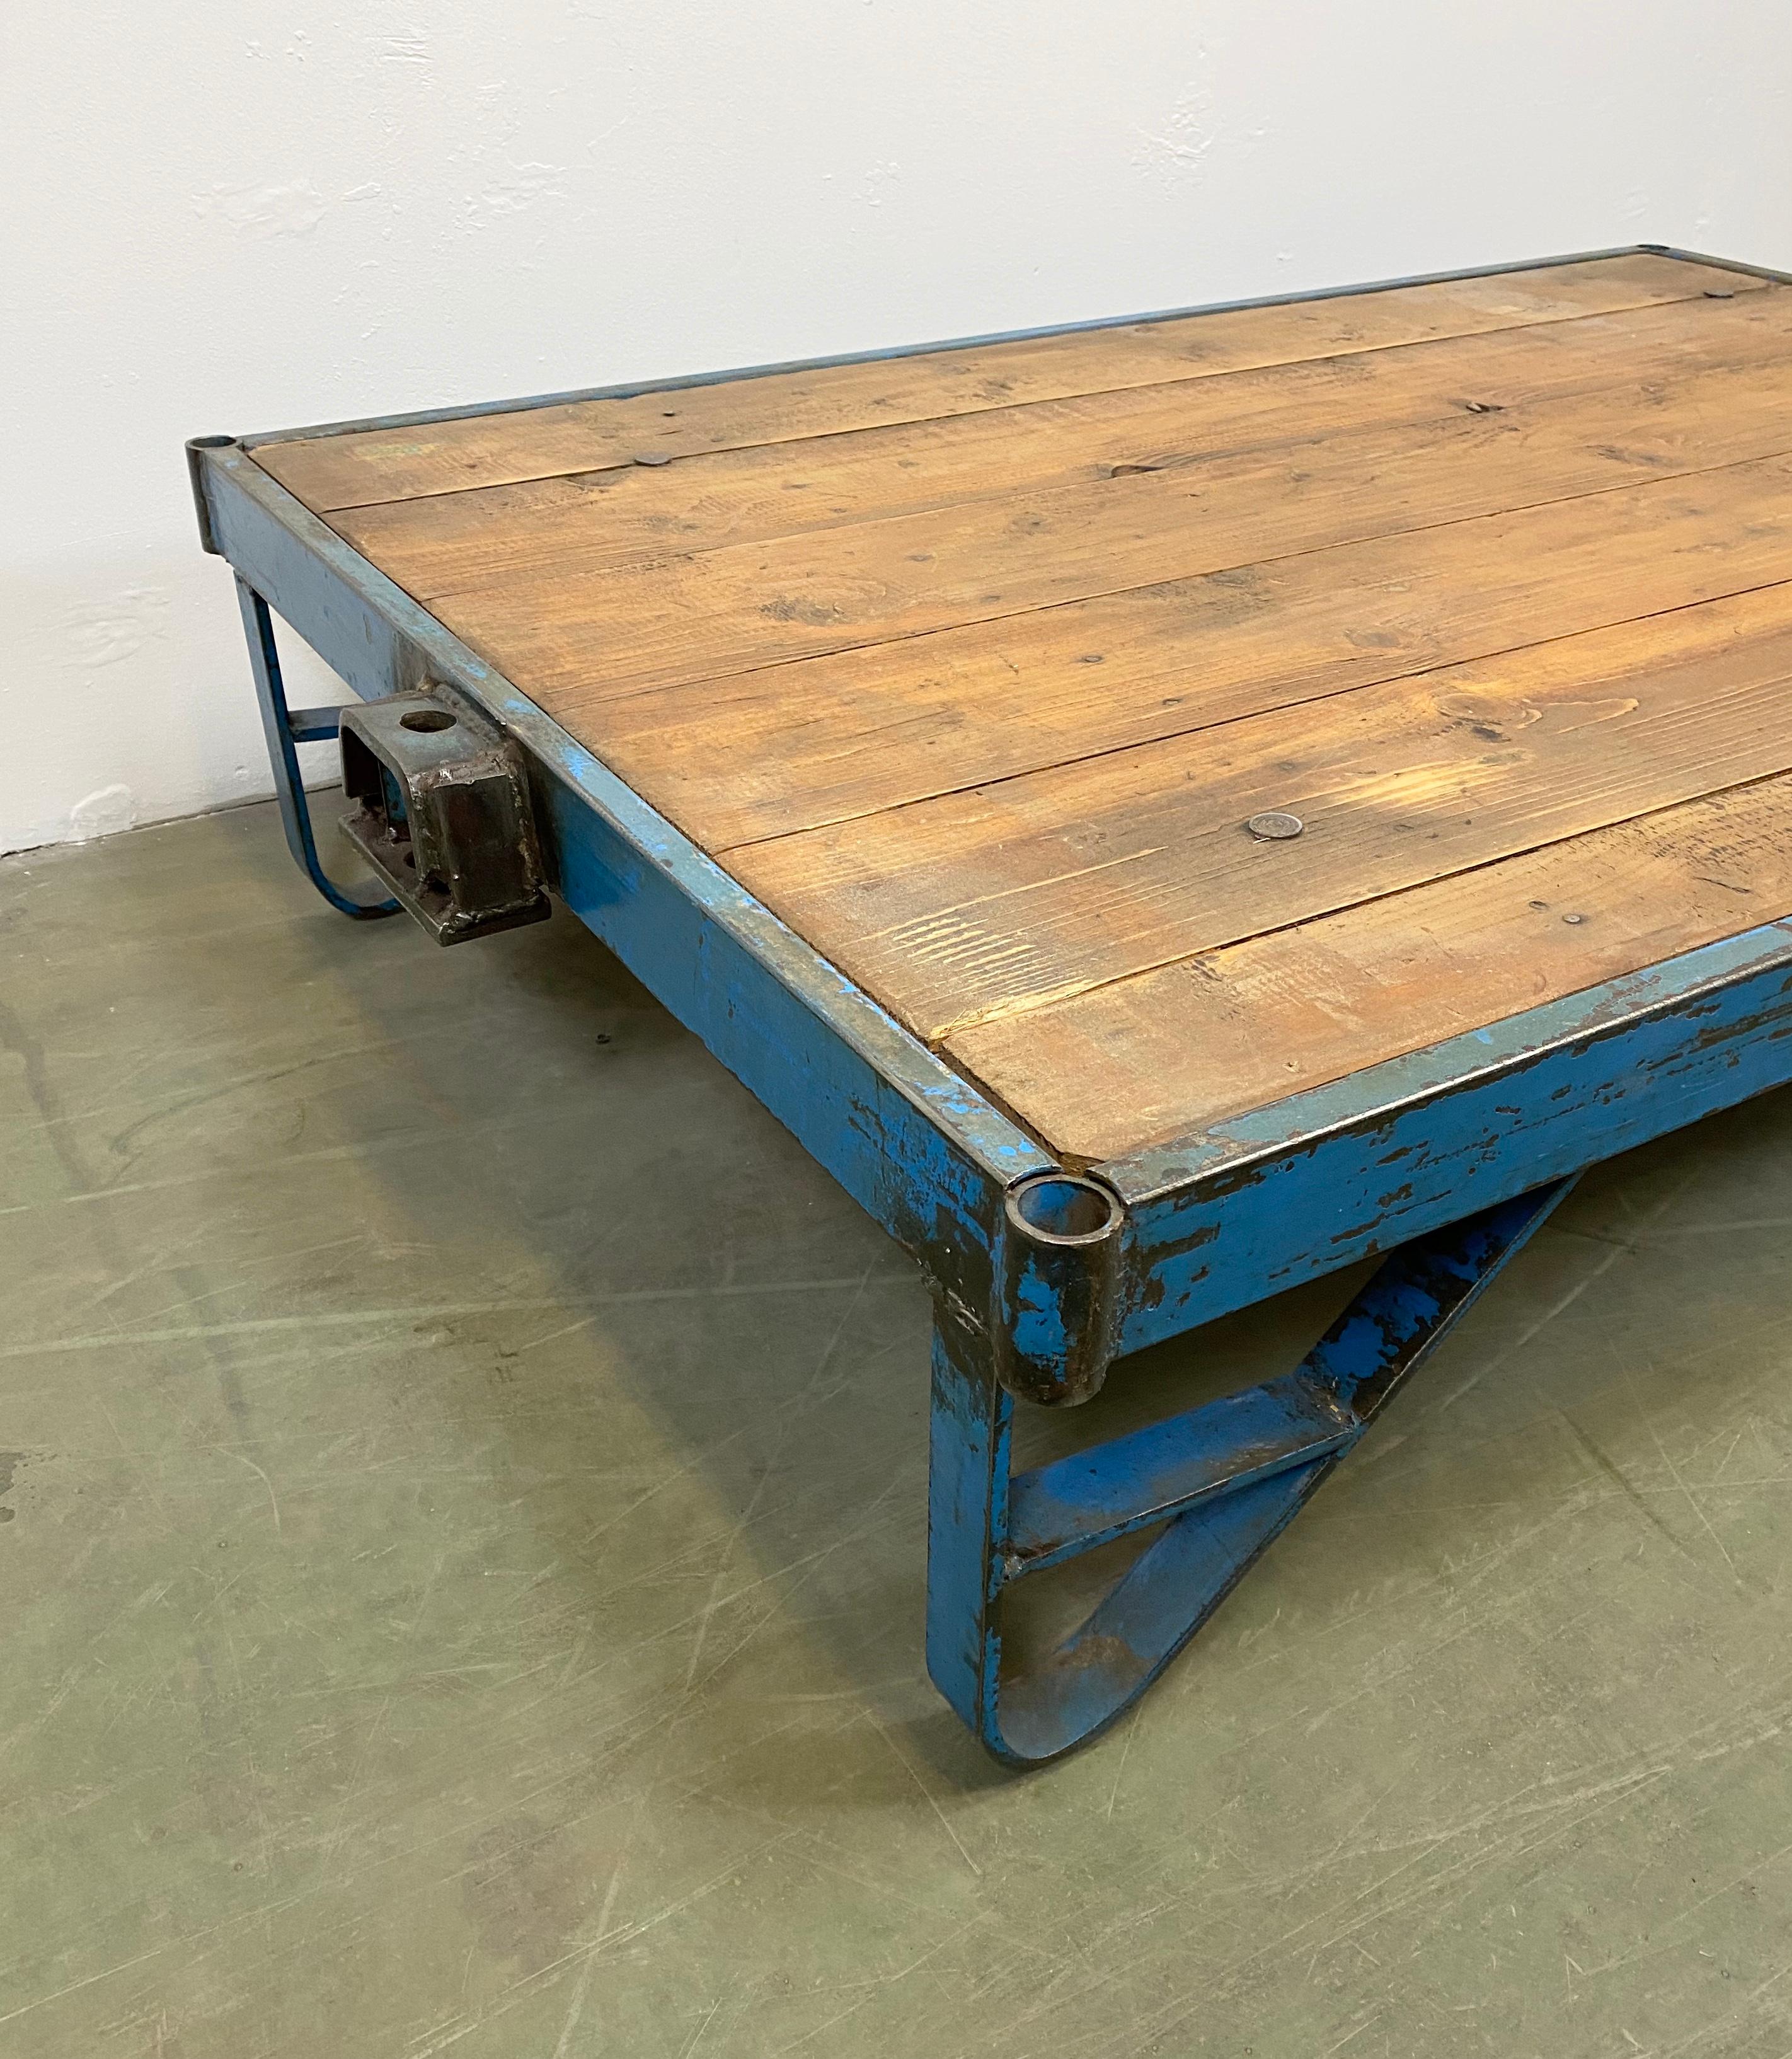 Former pallet truck from a factory now serves as a coffee table. It features a blue iron construction with two wheels and a solid wooden plate. The weight of the table is 40 kg.